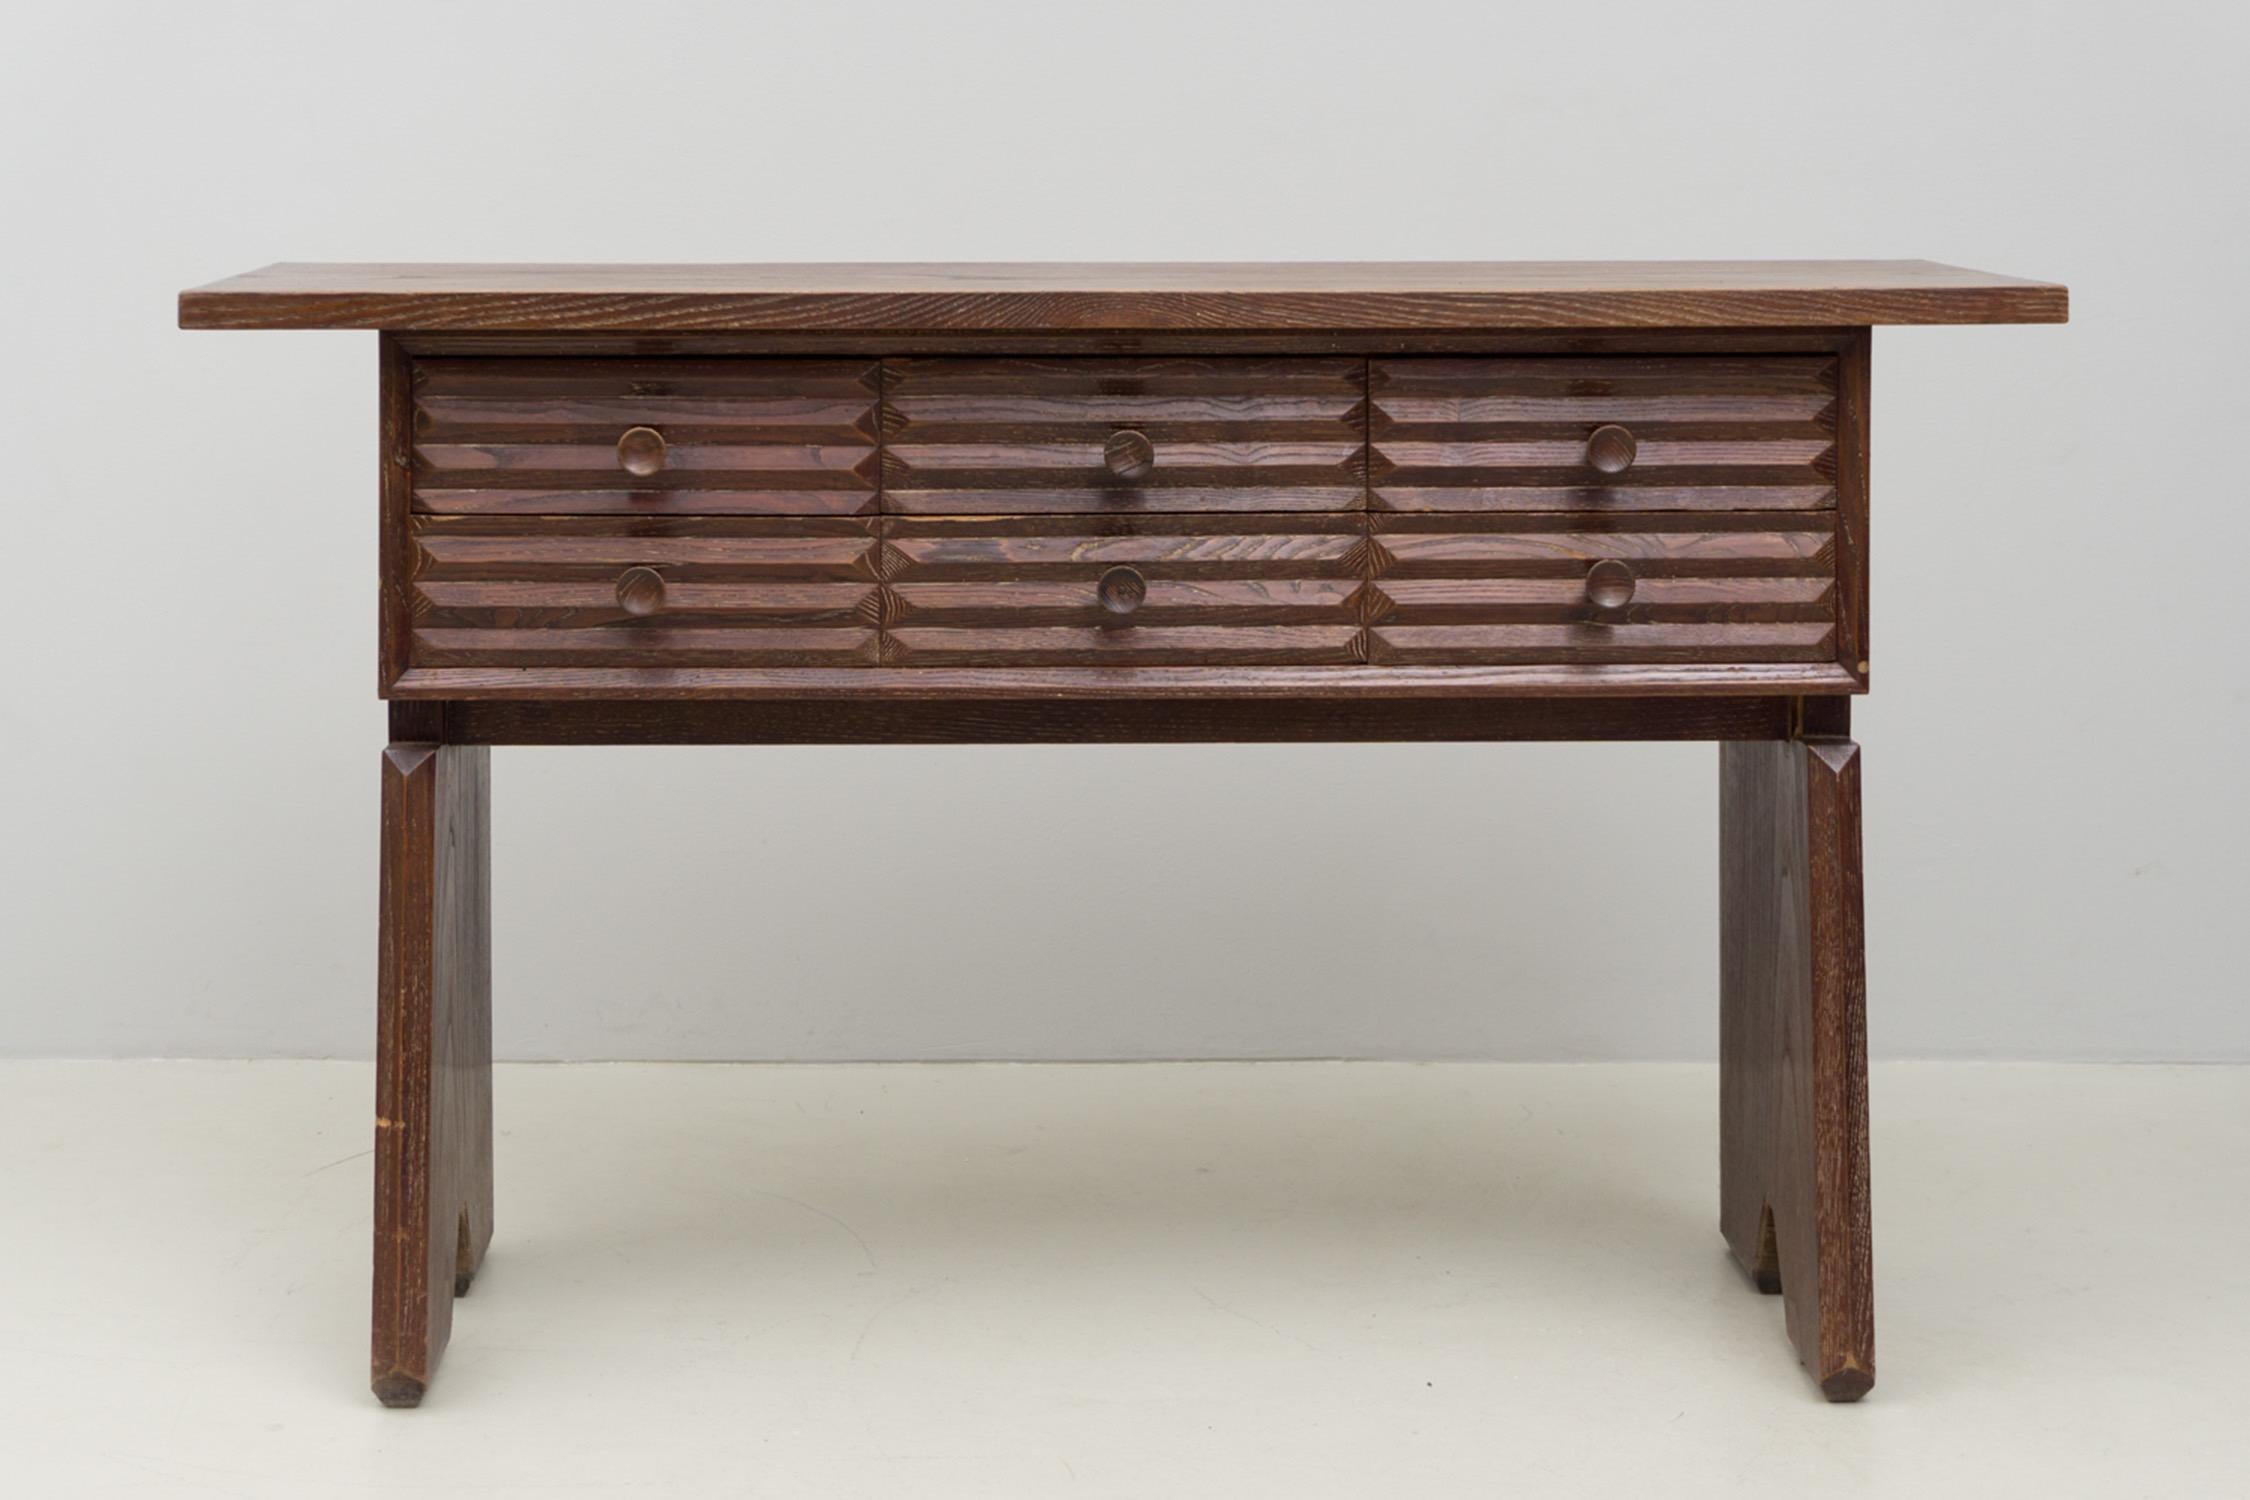 Rare and extravagant sideboard with drawers, made of stained solid wood. Six equally sized drawers with extraordinary surface design and round knobs, stable design of the sides.


